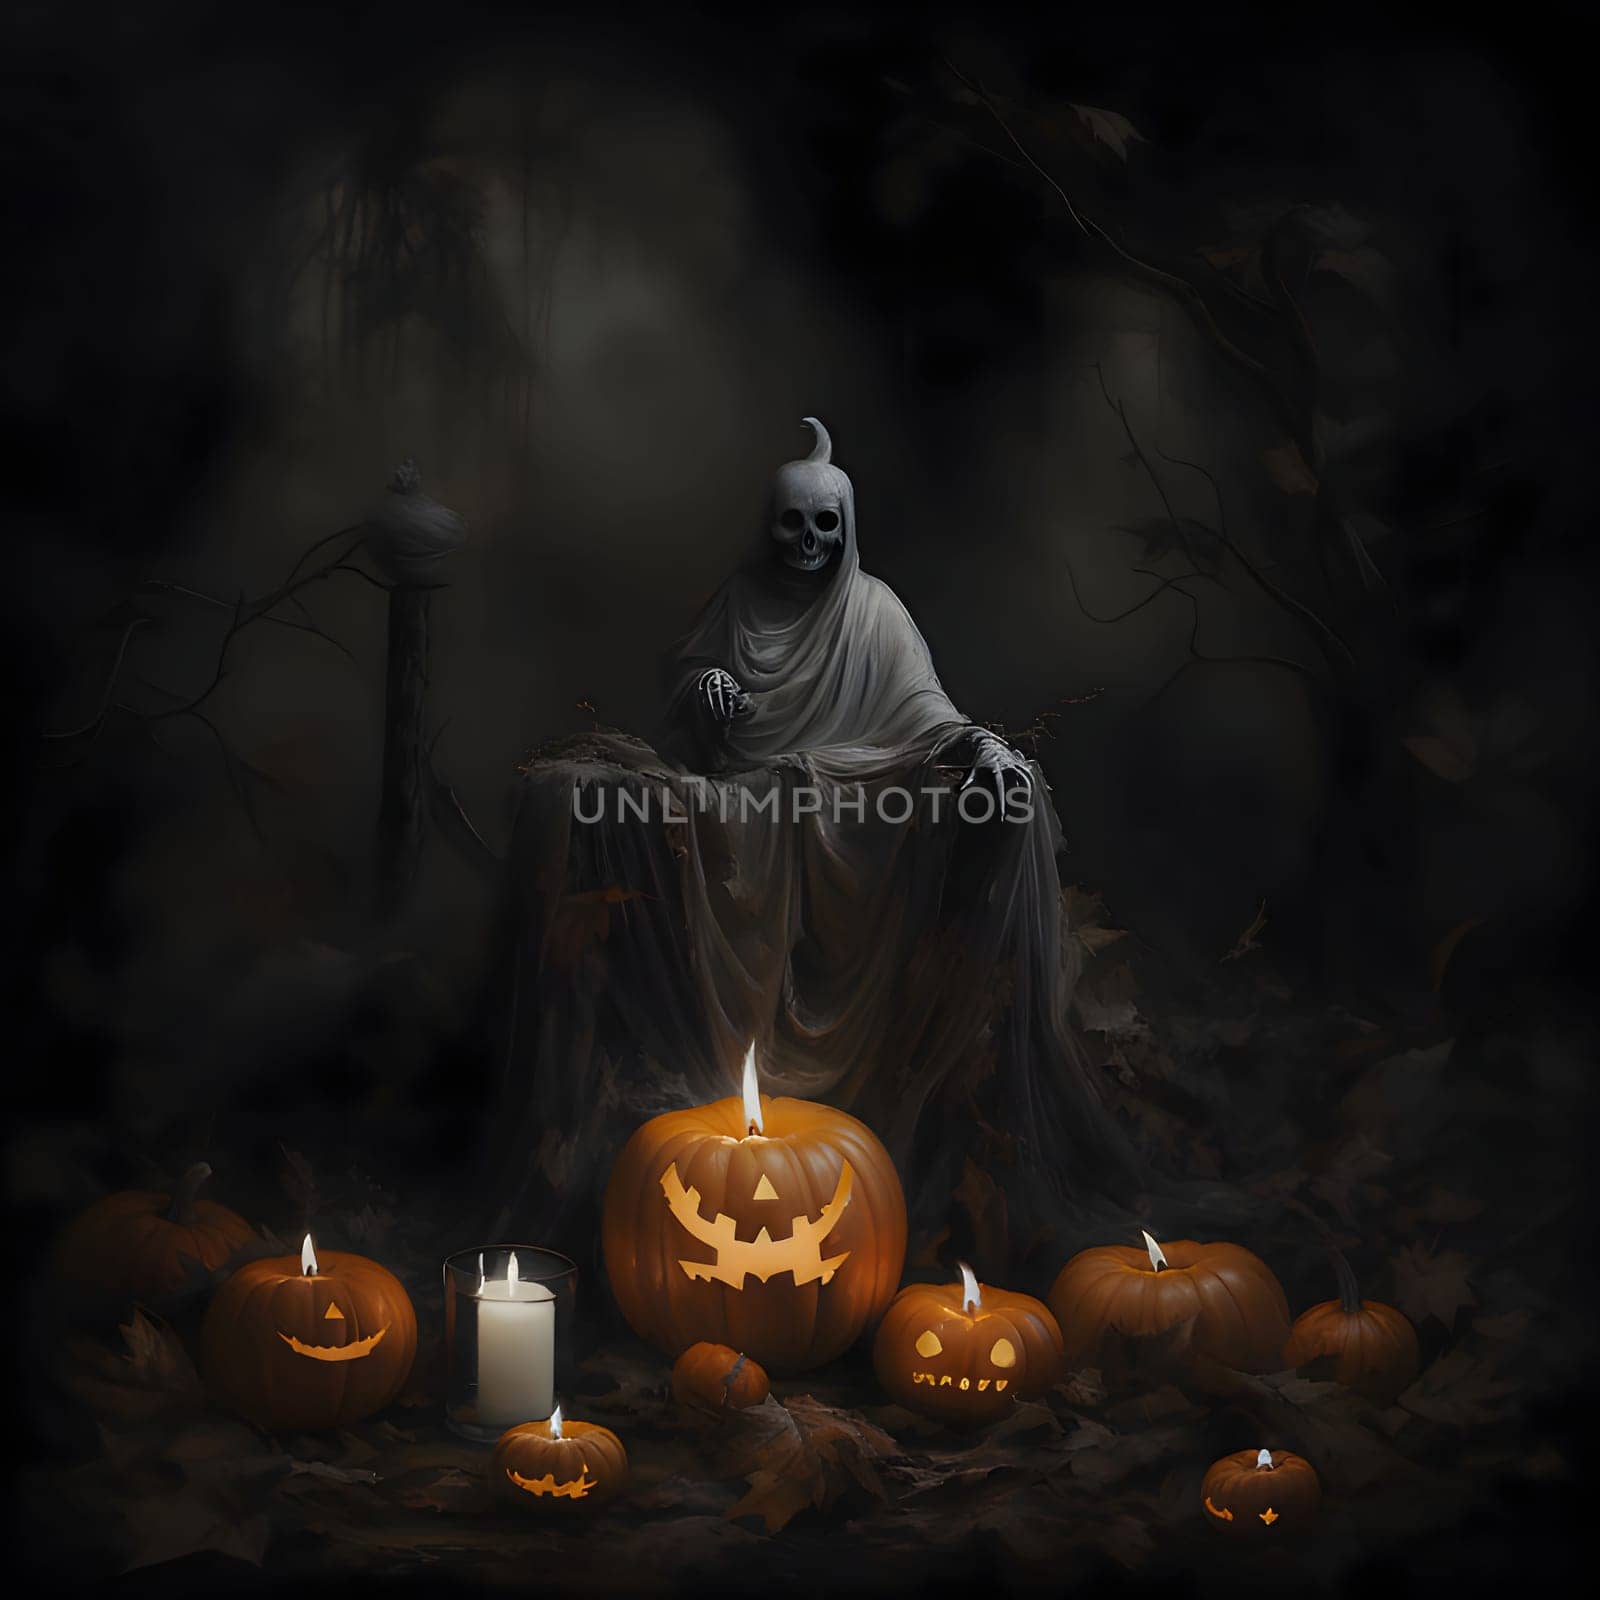 Dark statue and burning candle-pumpkins, a Halloween image. by ThemesS